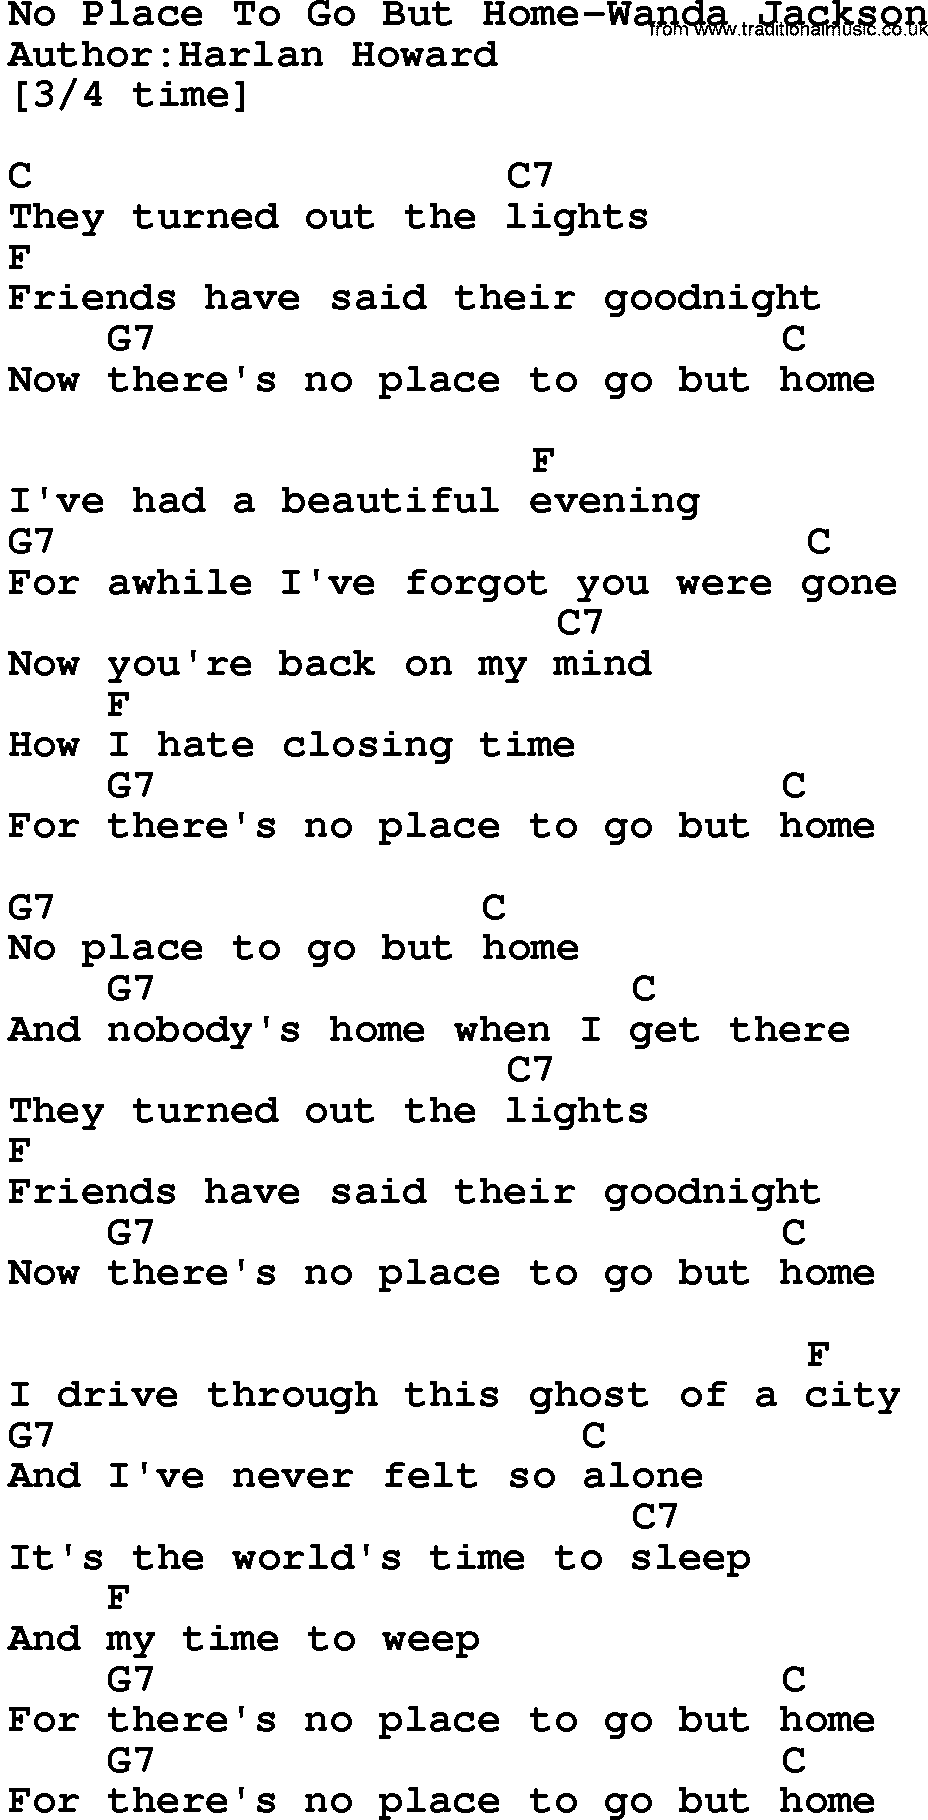 Country music song: No Place To Go But Home-Wanda Jackson lyrics and chords